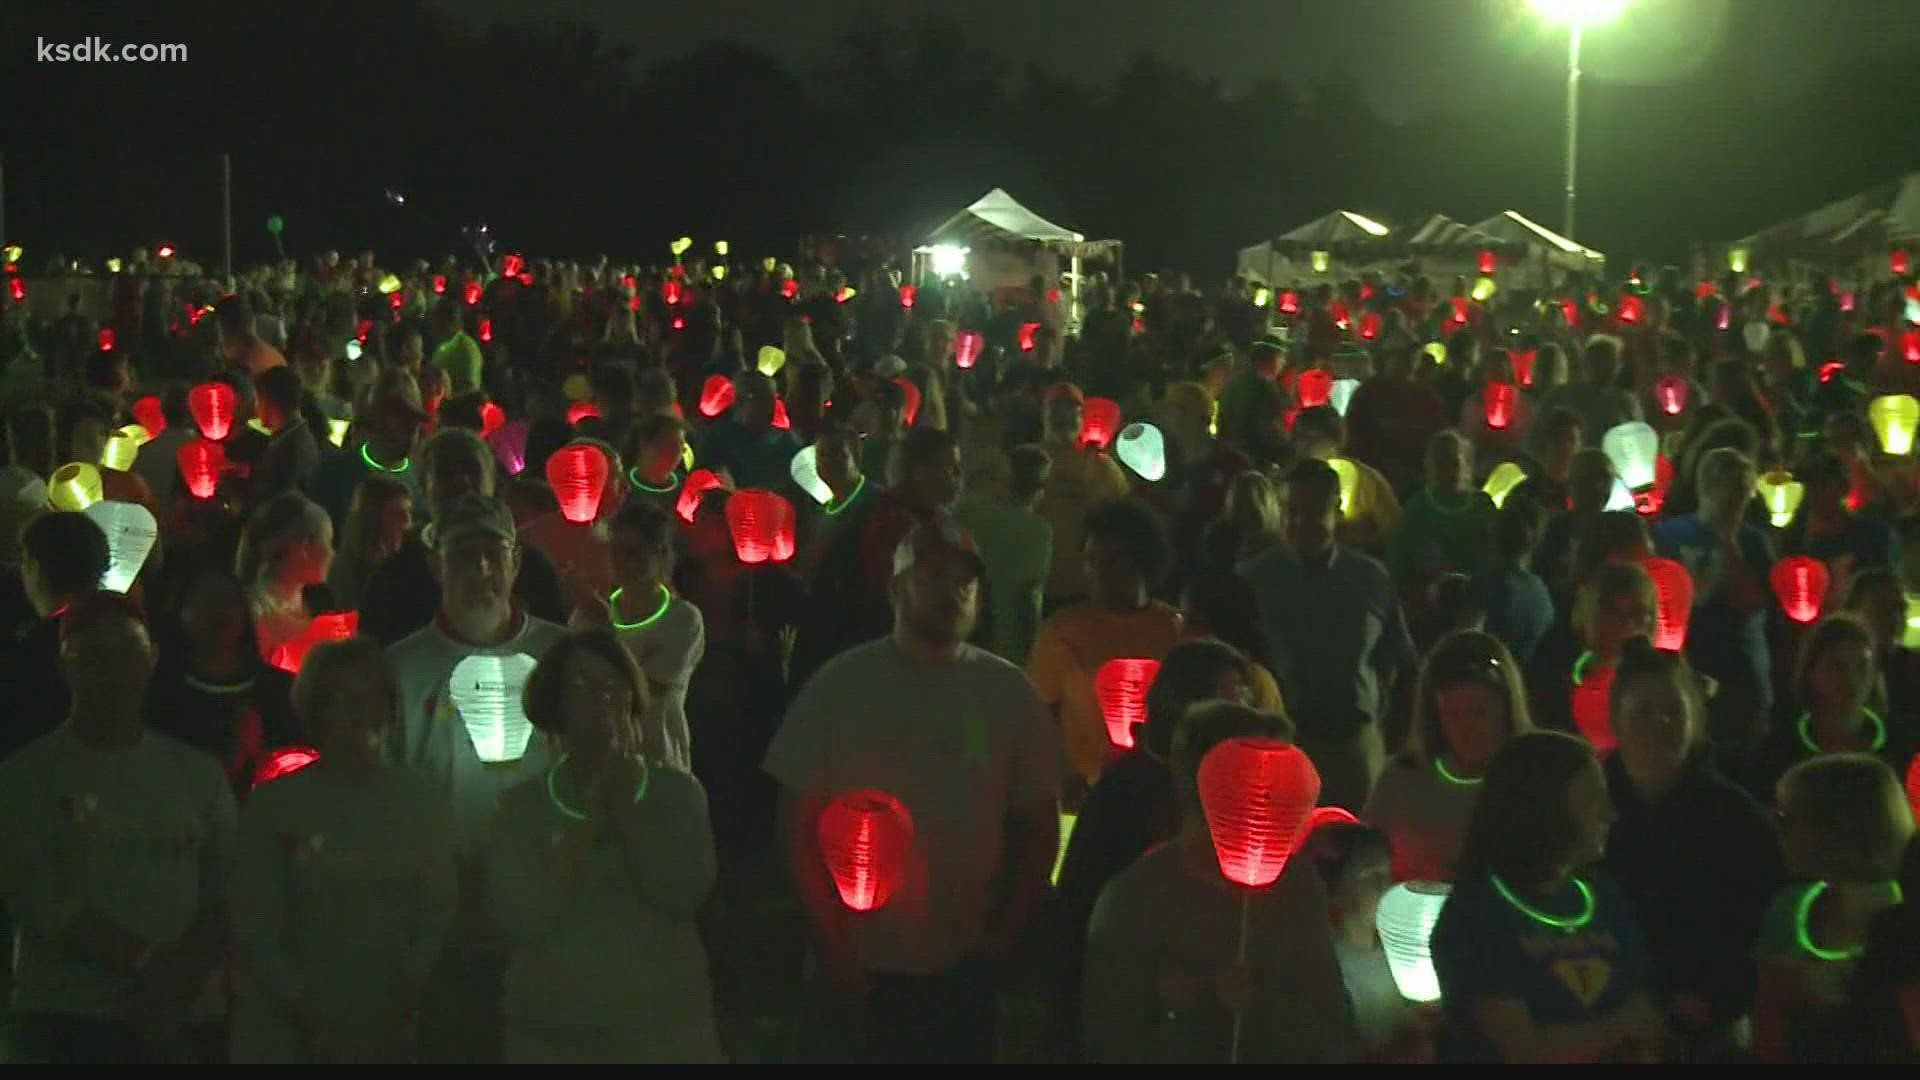 A moving event is happening in Forest Park tomorrow night, October 16 – bringing light to the darkness of cancer as lanterns will light up the night sky.